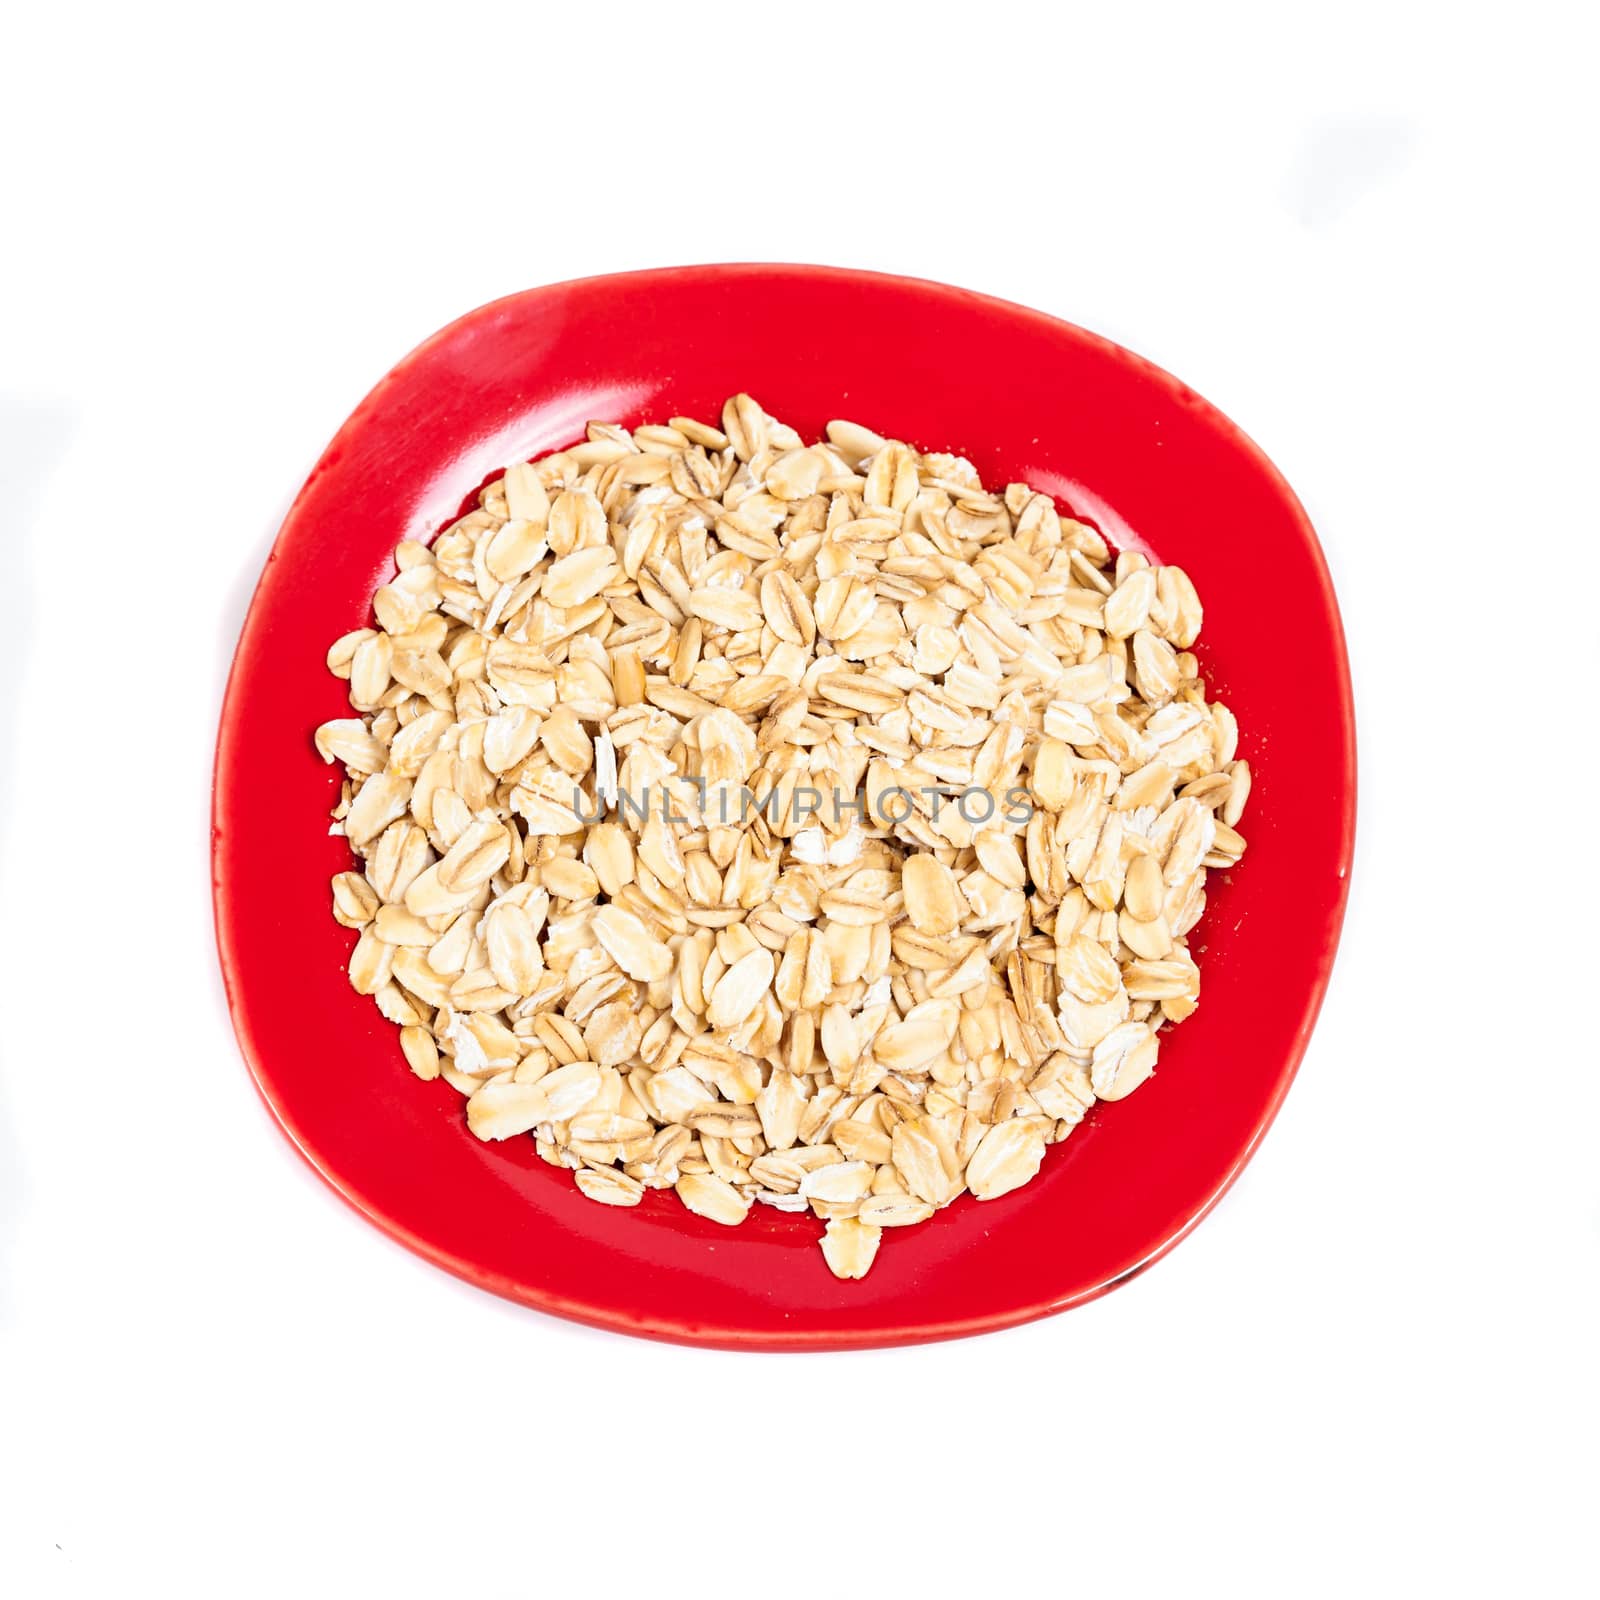 red dish  with oats flakes pile on white background.